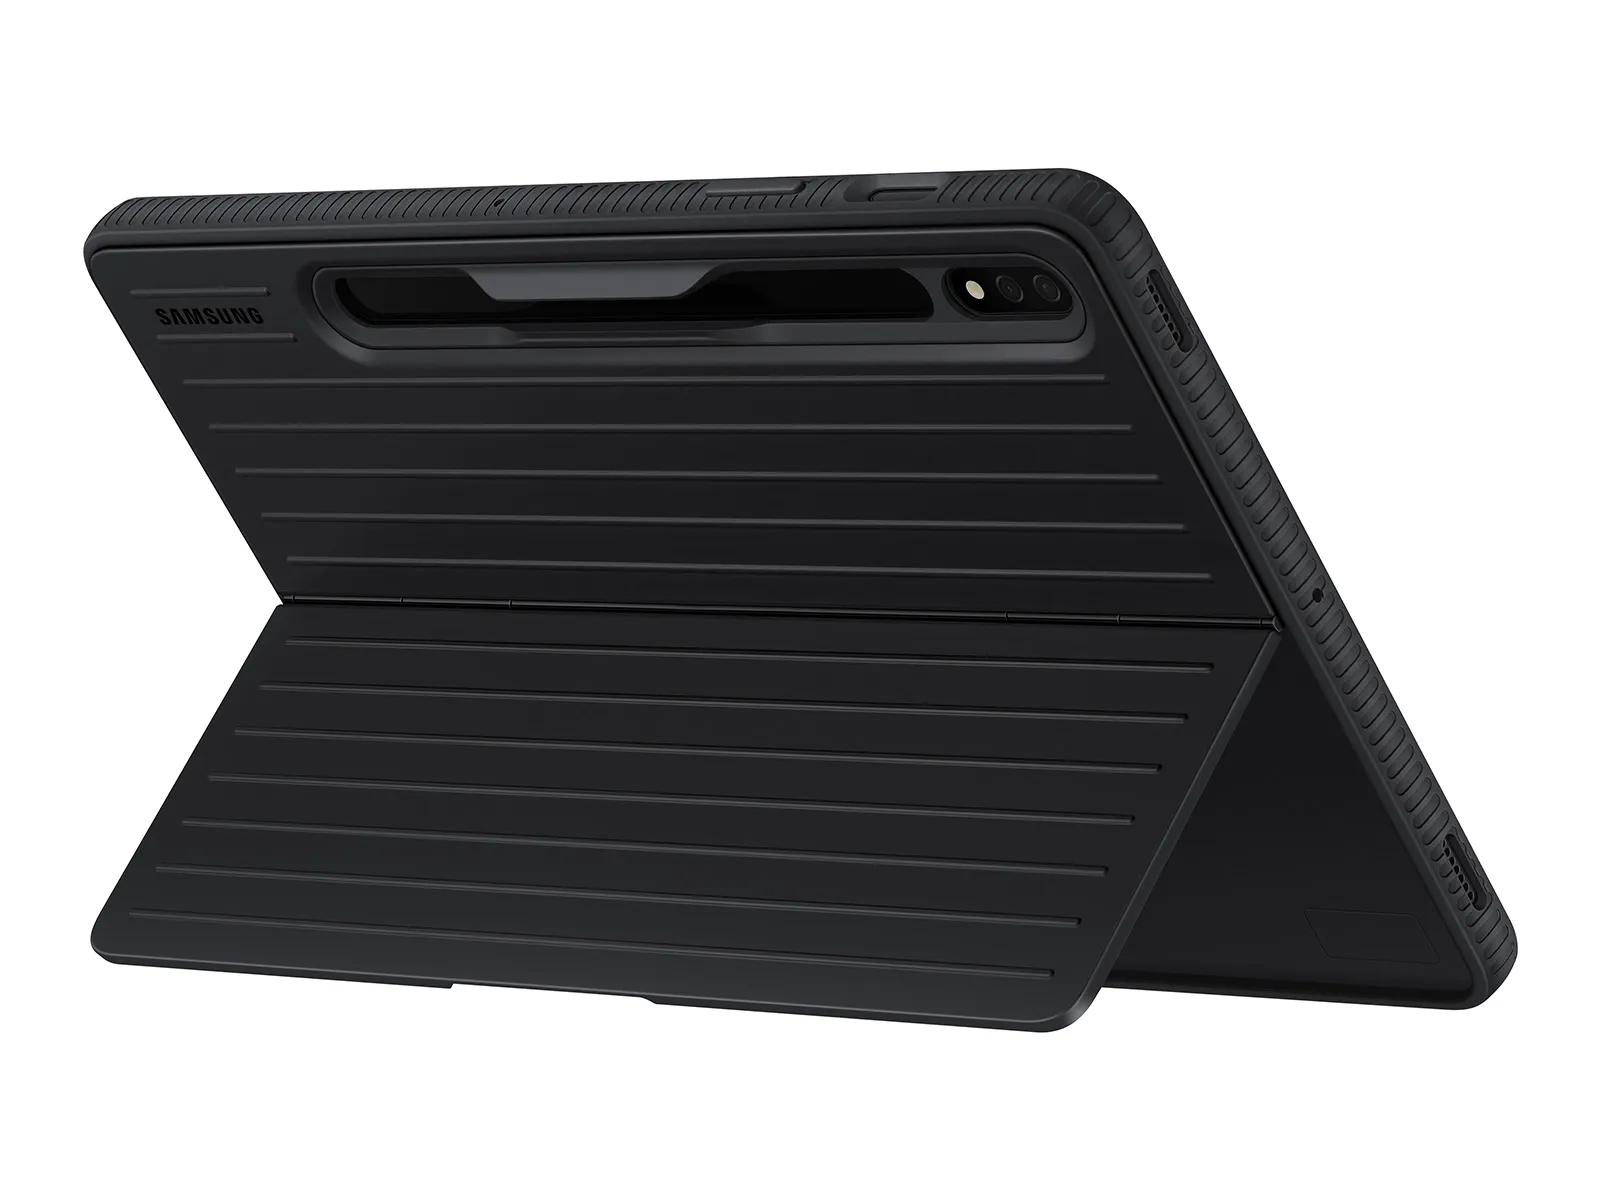 This basic case protects your Galaxy Tab S8 from drops and bumps, but it leaves the screen visible at all times. It also has a kickstand.